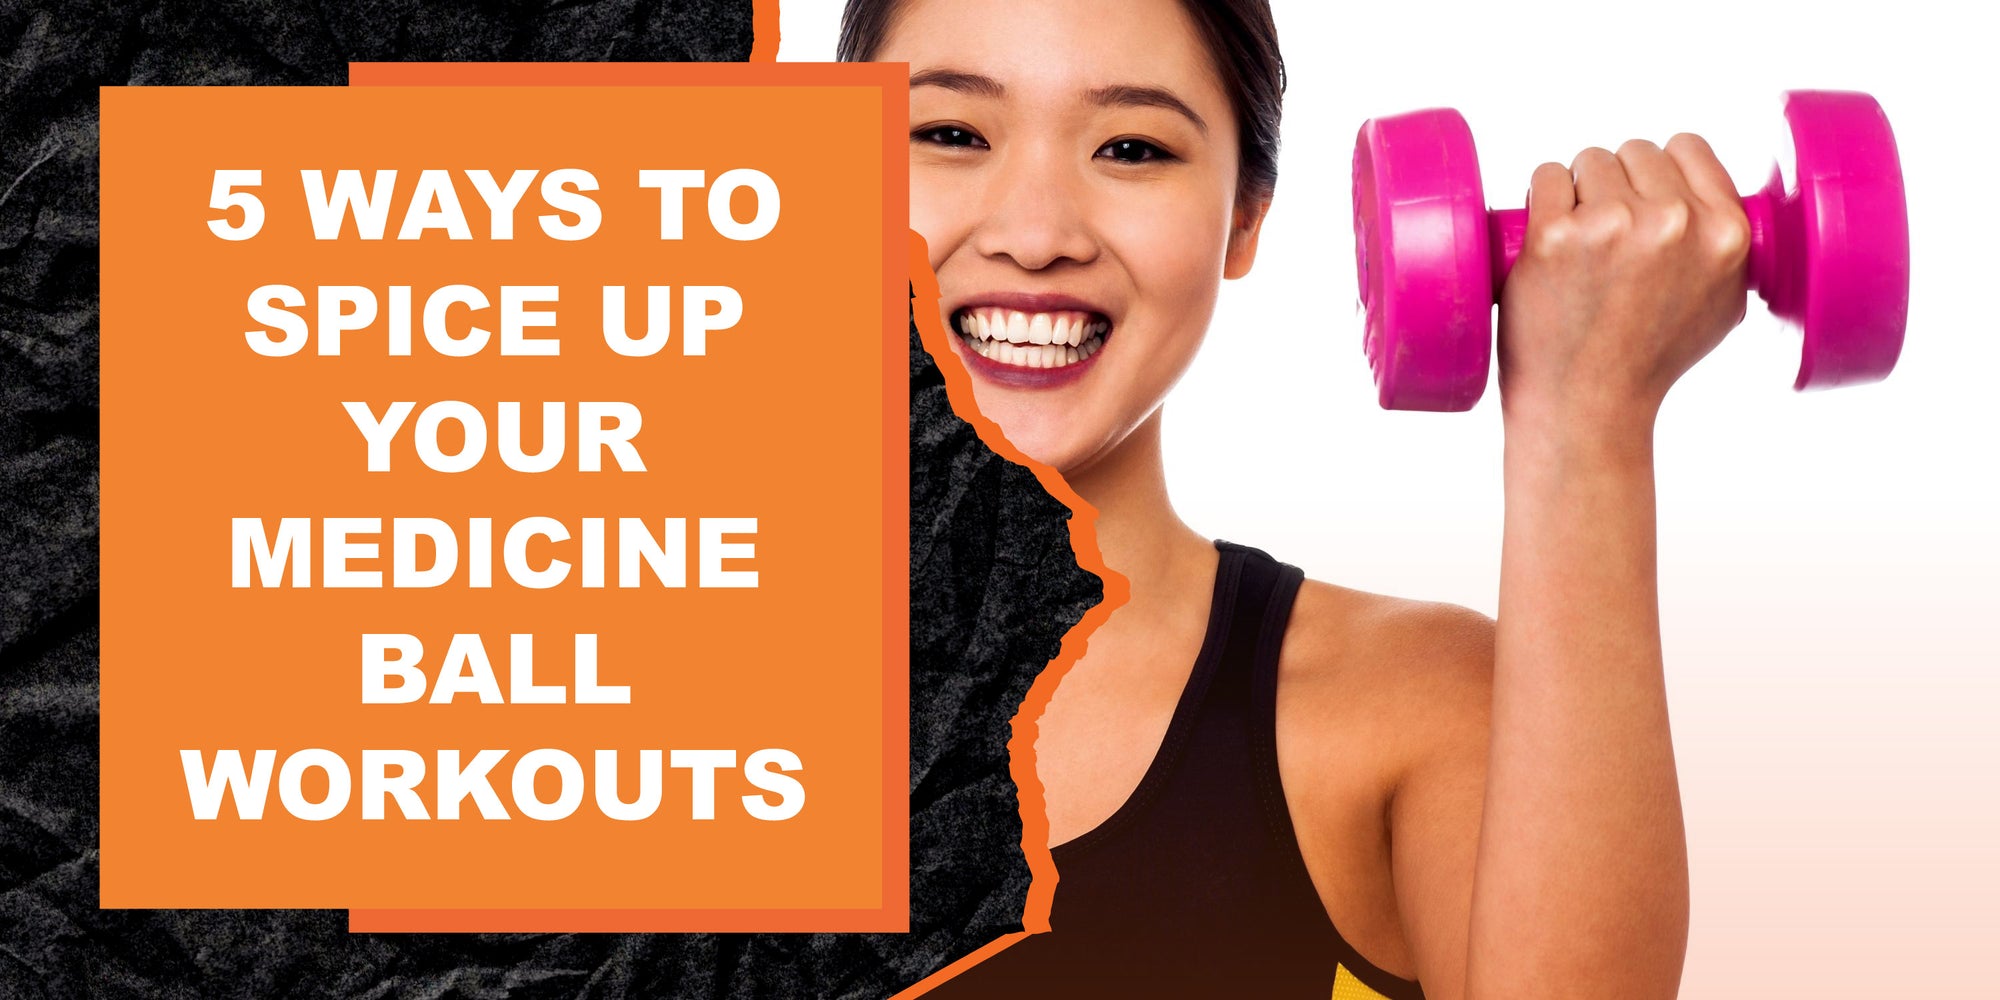 5 Ways to Spice Up Your Medicine Ball Workouts